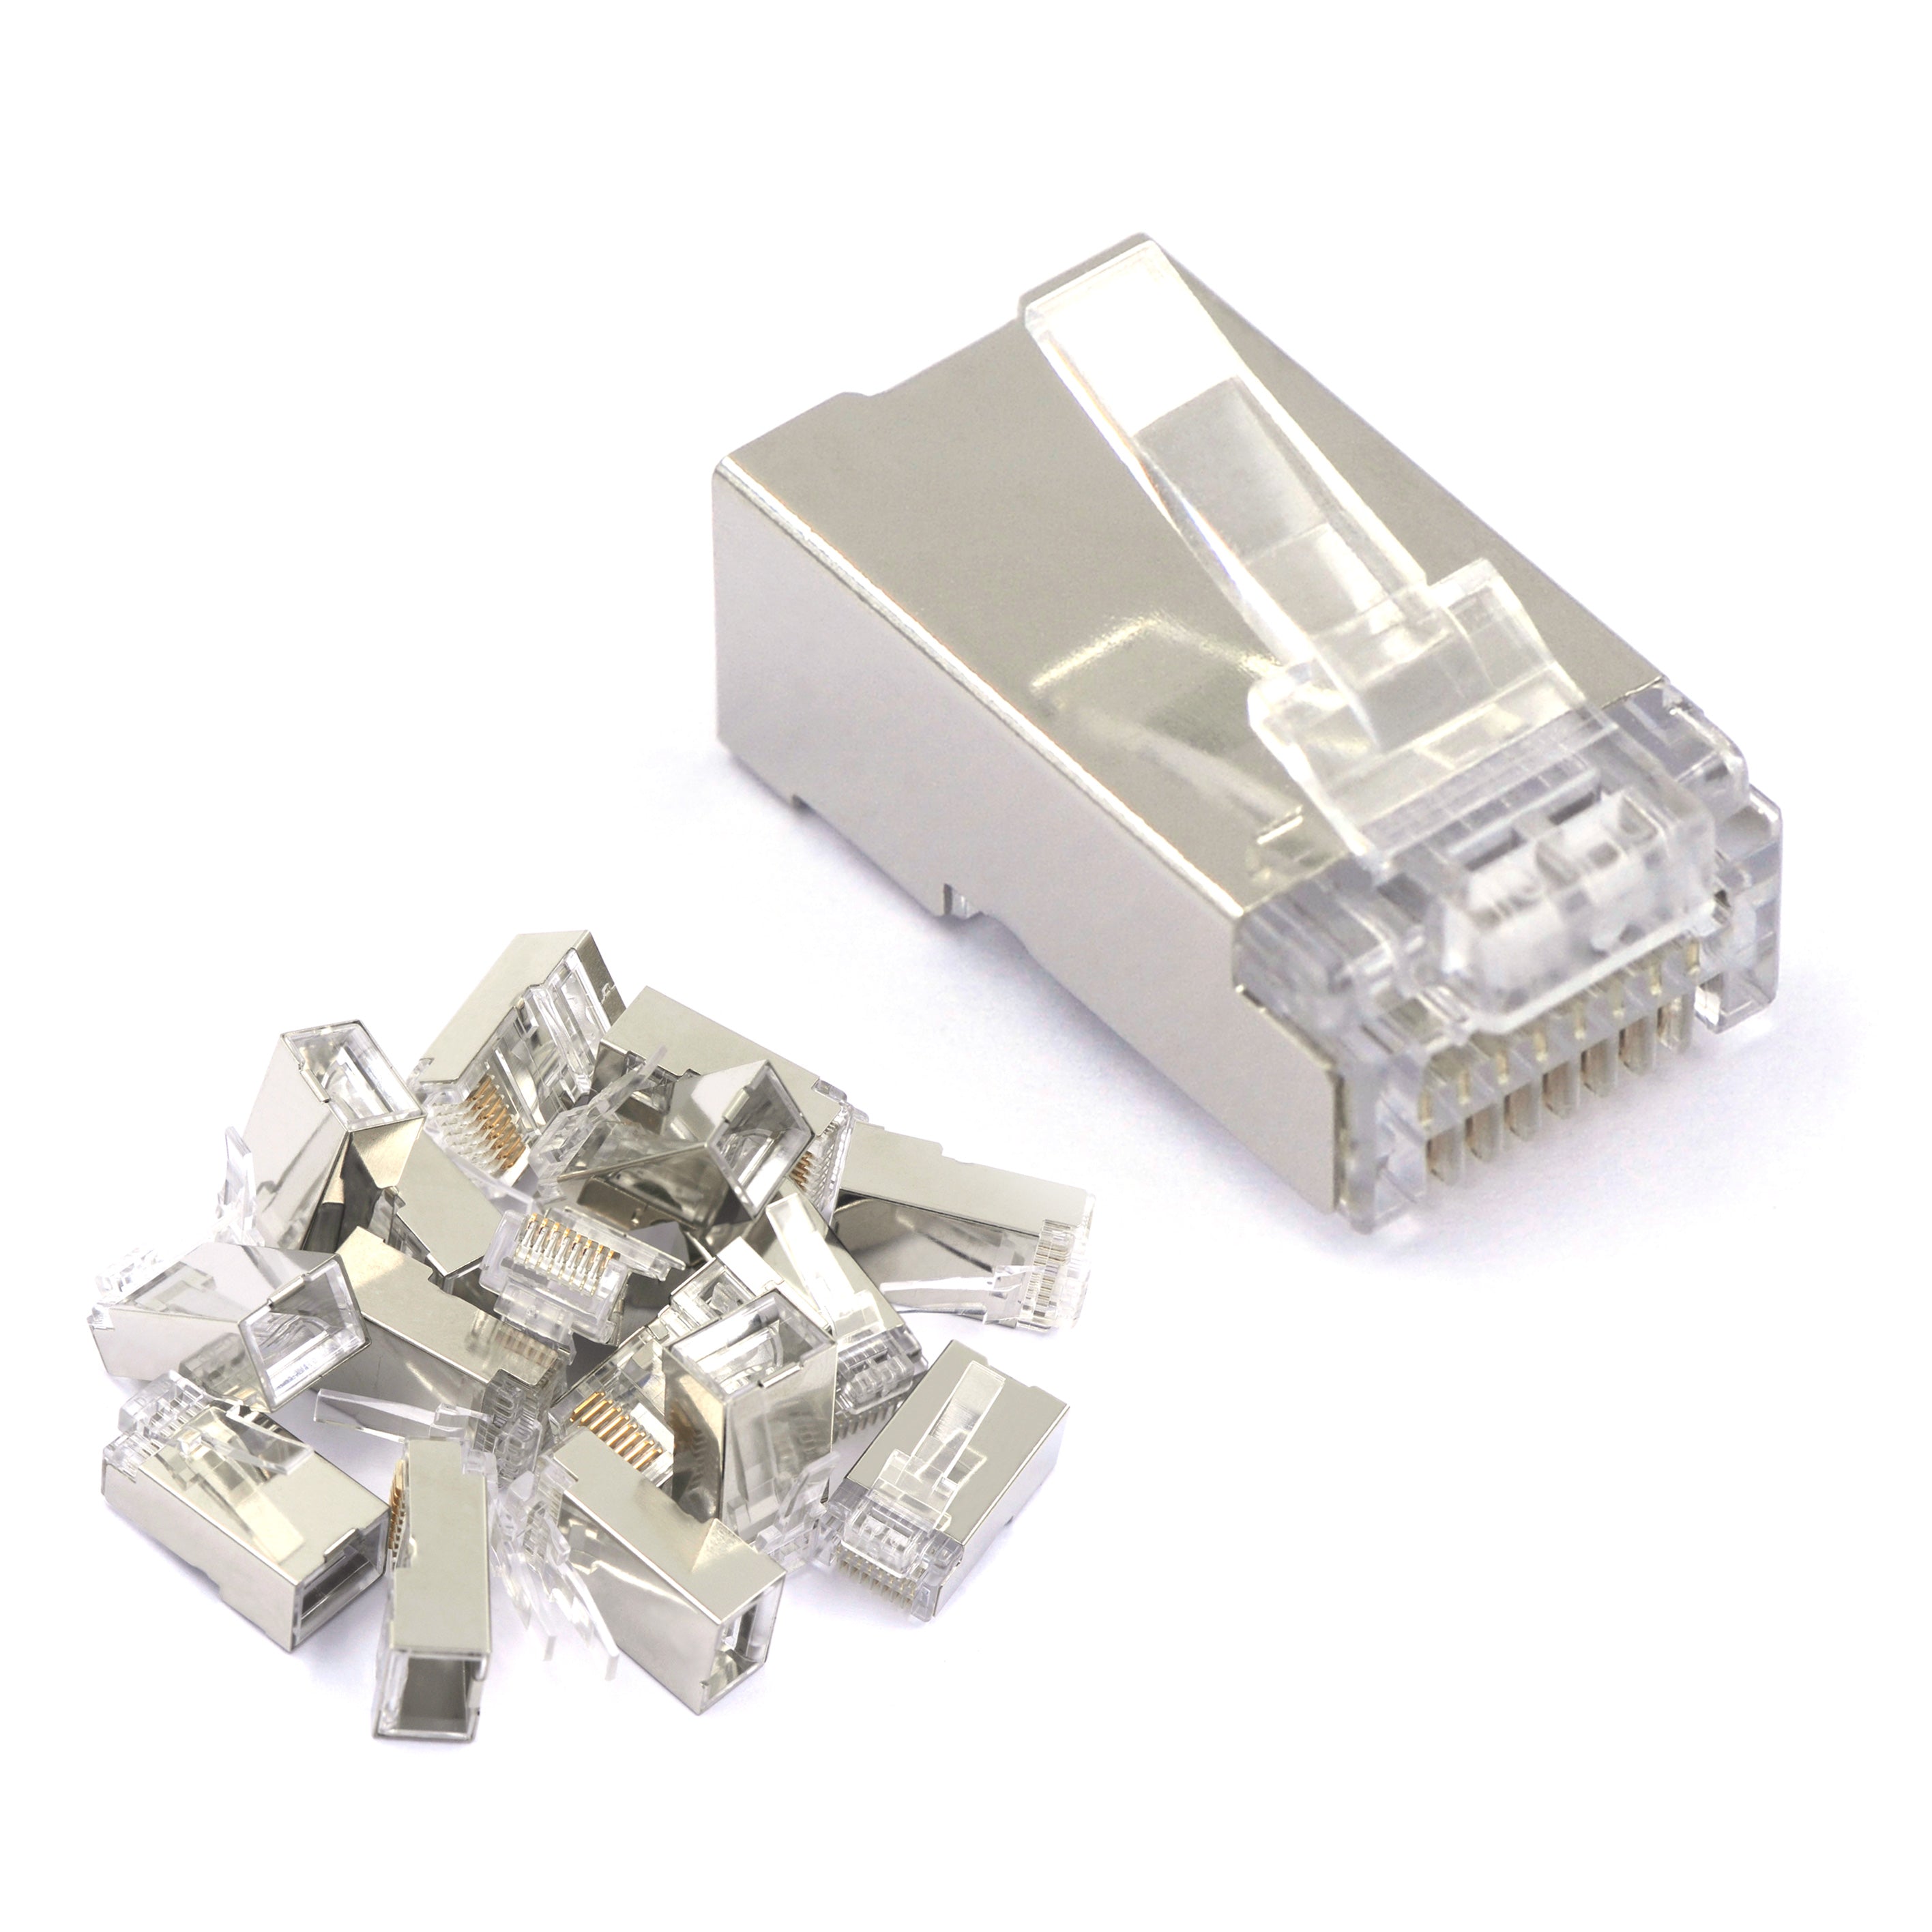 Get Wholesale conector rj45 For Different Applications 